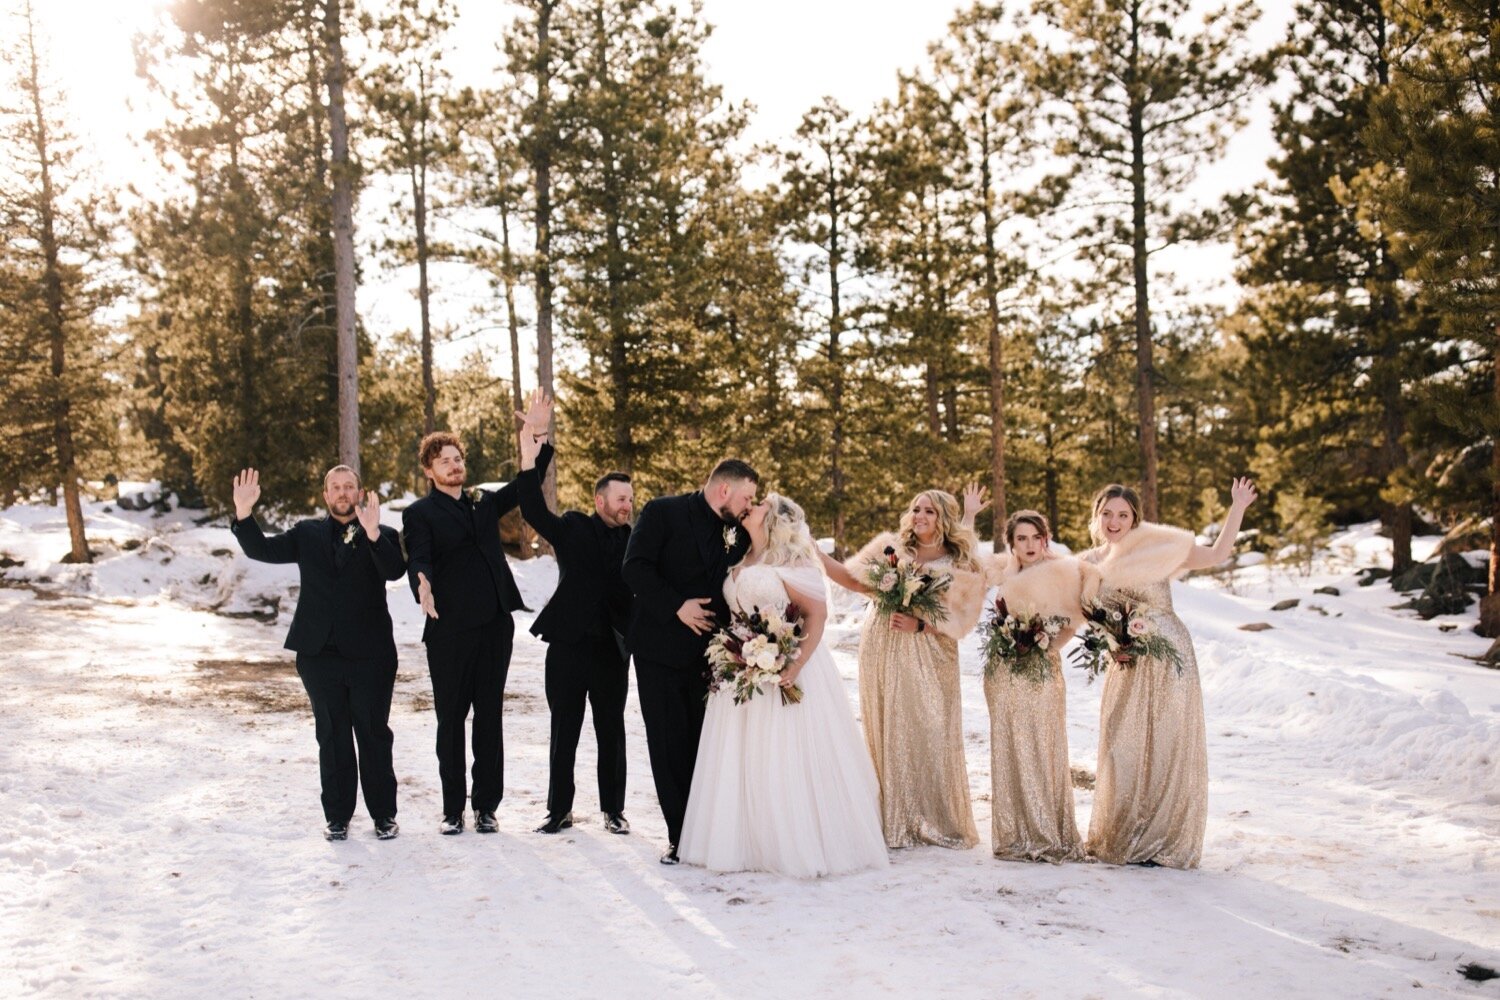  Bridal party, wedding party, bridesmaids dresses, bridesmaids photos, groomsmen photos, Winter Wedding, Colorado Wedding, Snowy Wedding, Mountain Wedding, Colorado Wedding Planner, Colorado Wedding Rentals, Red Feather Lakes Wedding, Fort Collins We